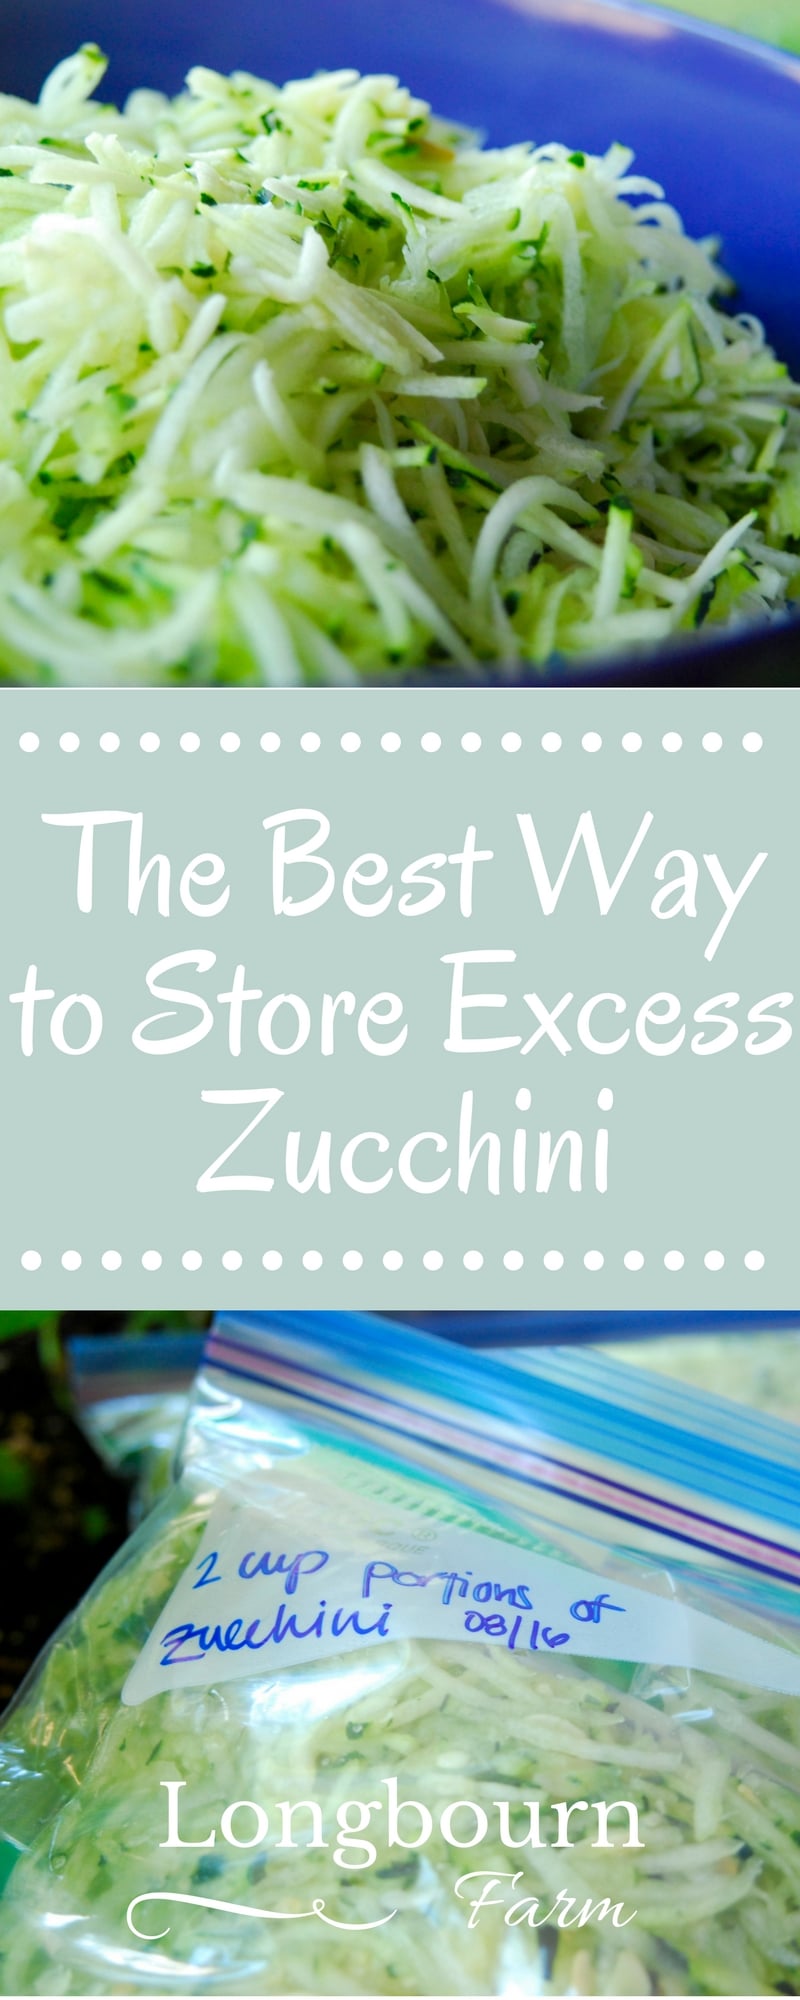 Find out the best way to store zucchini! Shredding and freezing it is the way to go! It's easy, fast, and lets you enjoy it all winter long.